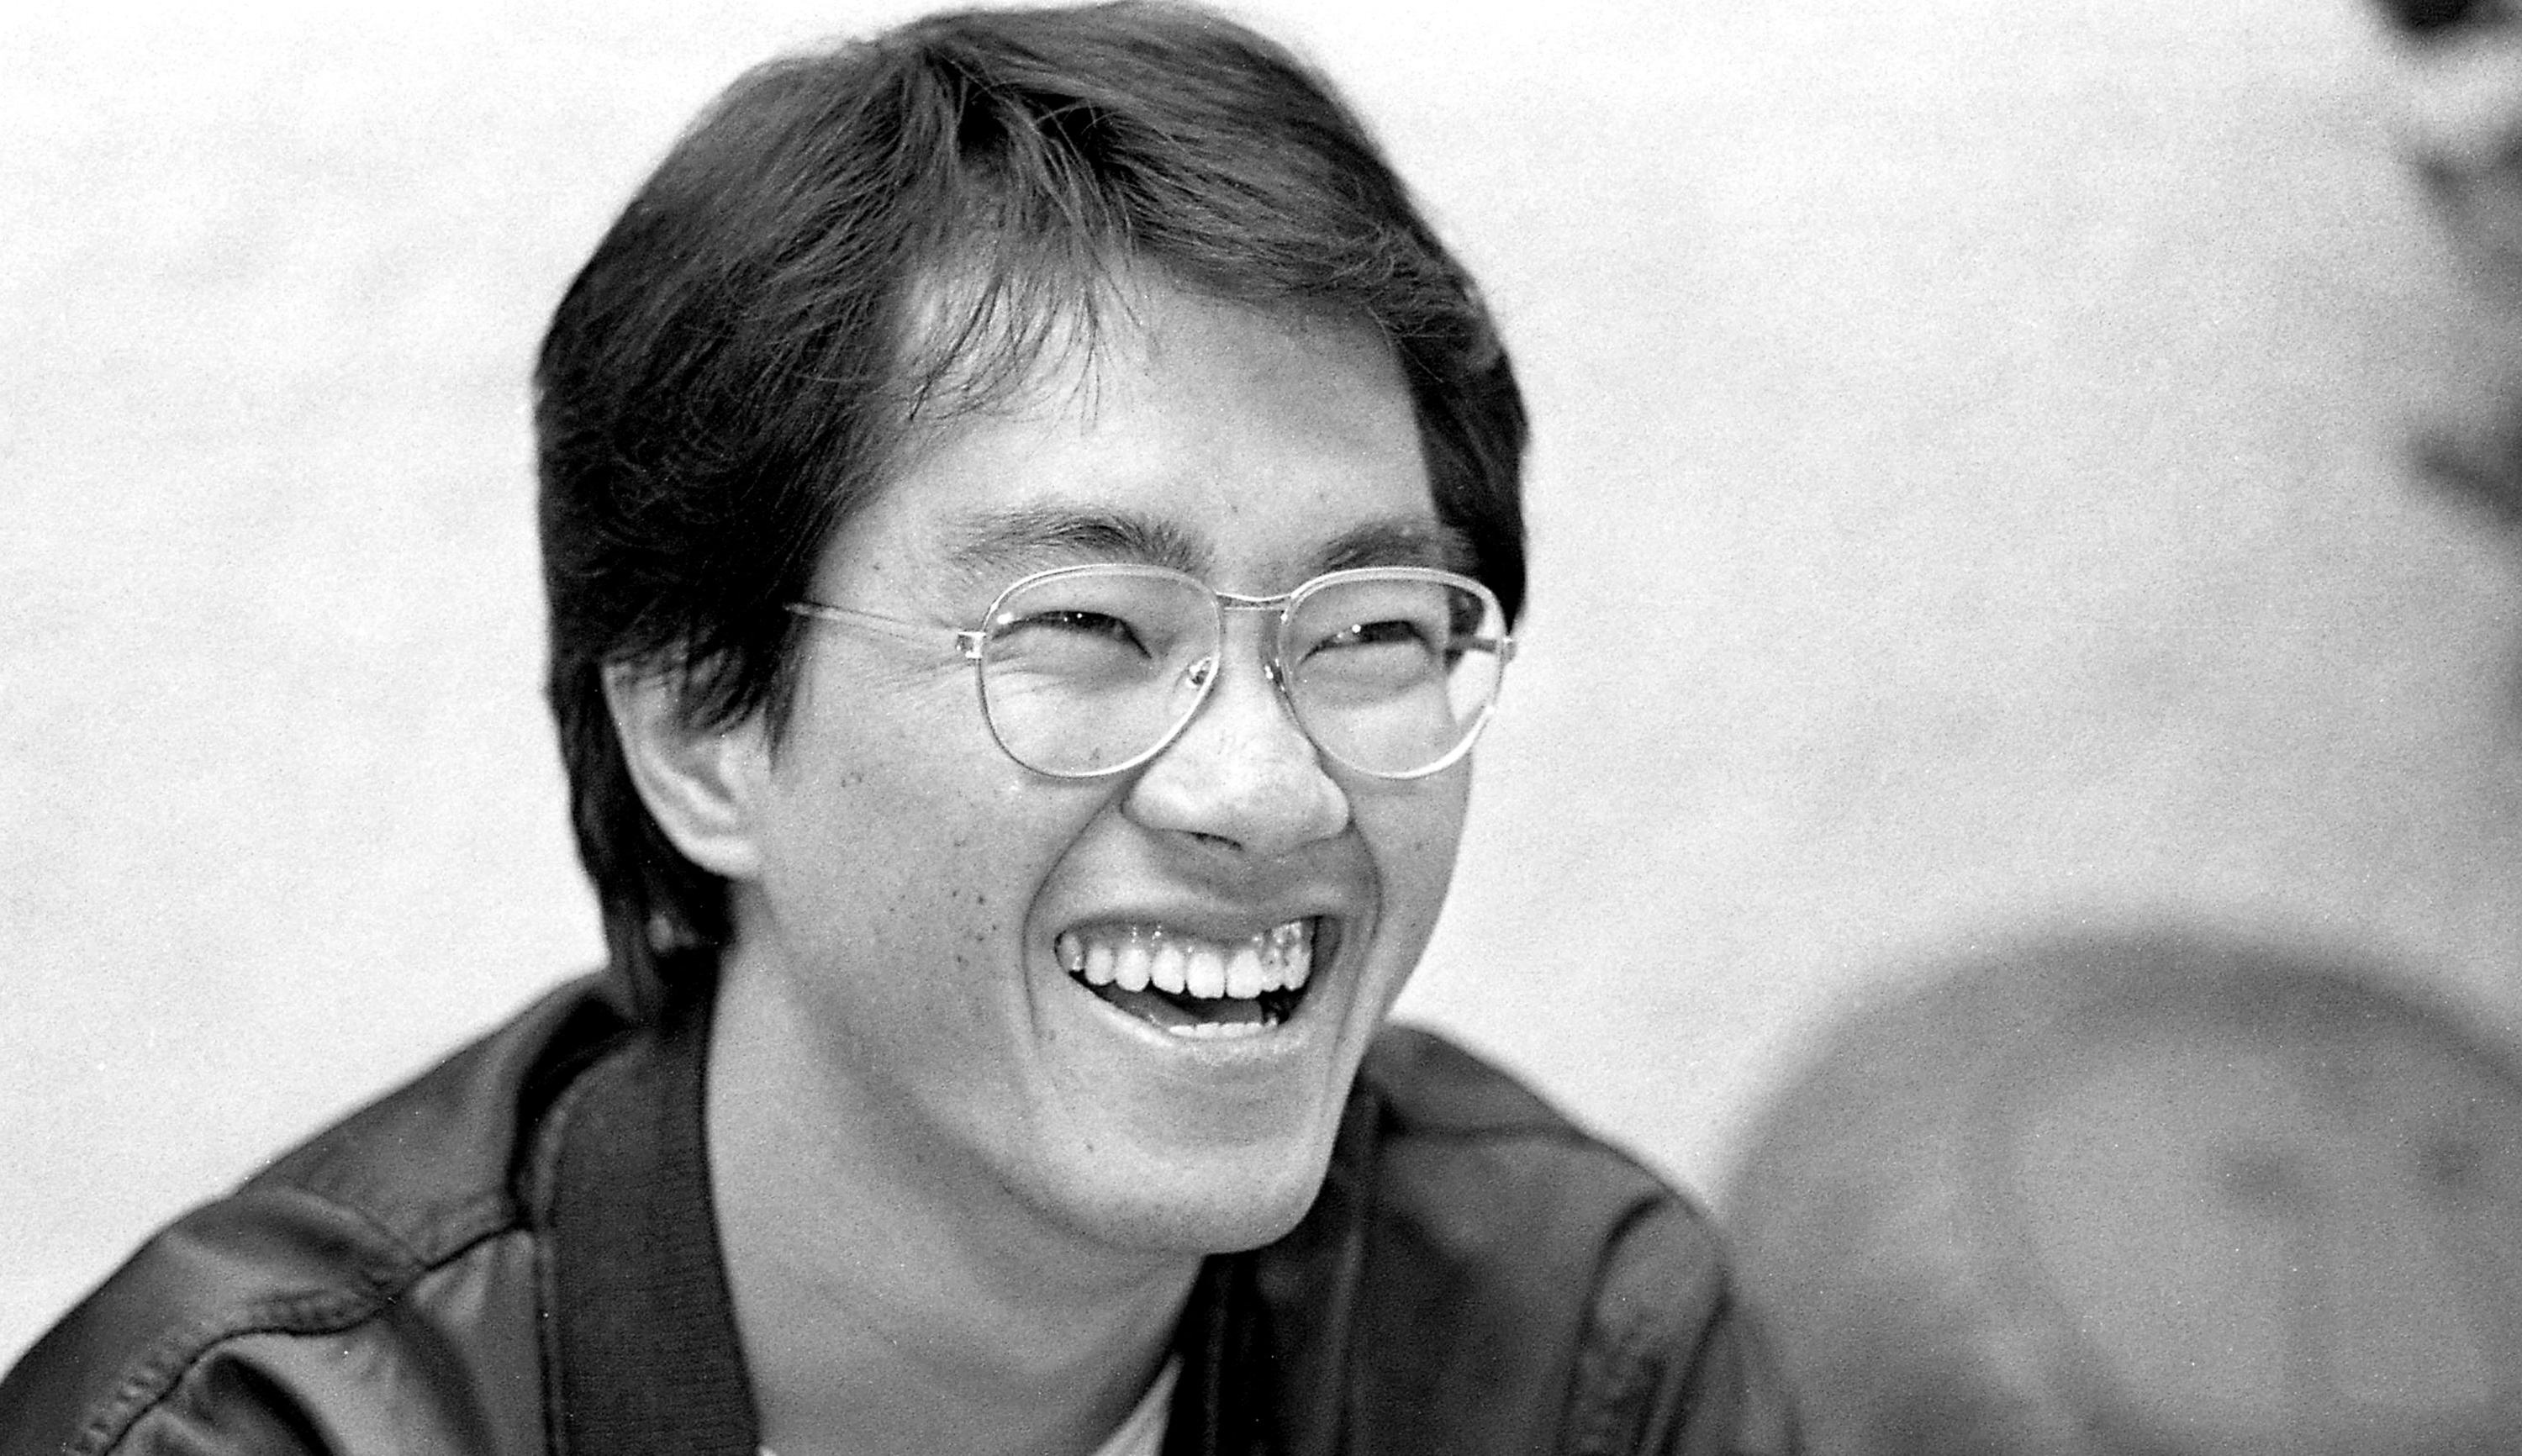 Man with glasses smiling, wearing a jacket, in a black and white photograph